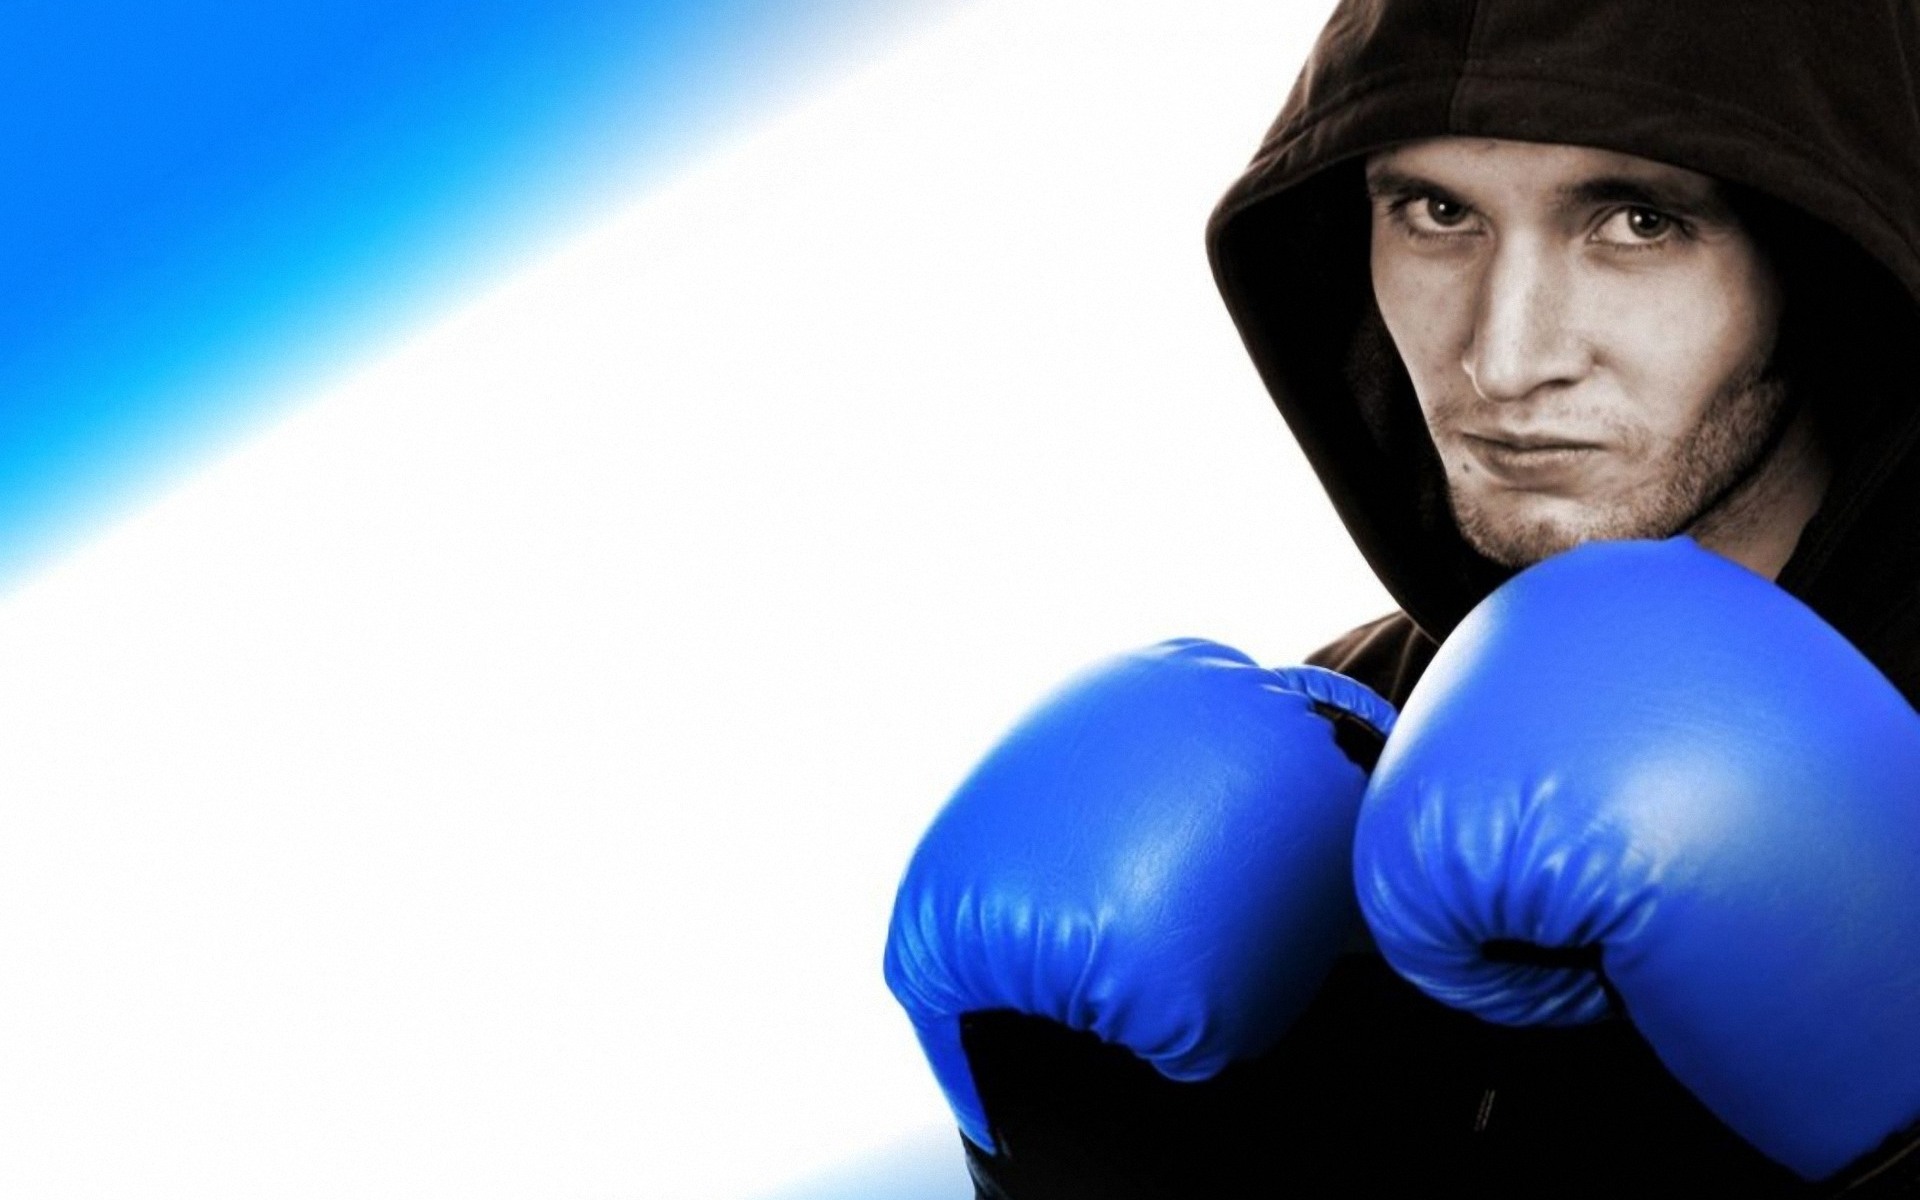 Boxing Young Handsome Boxer Wallpaper